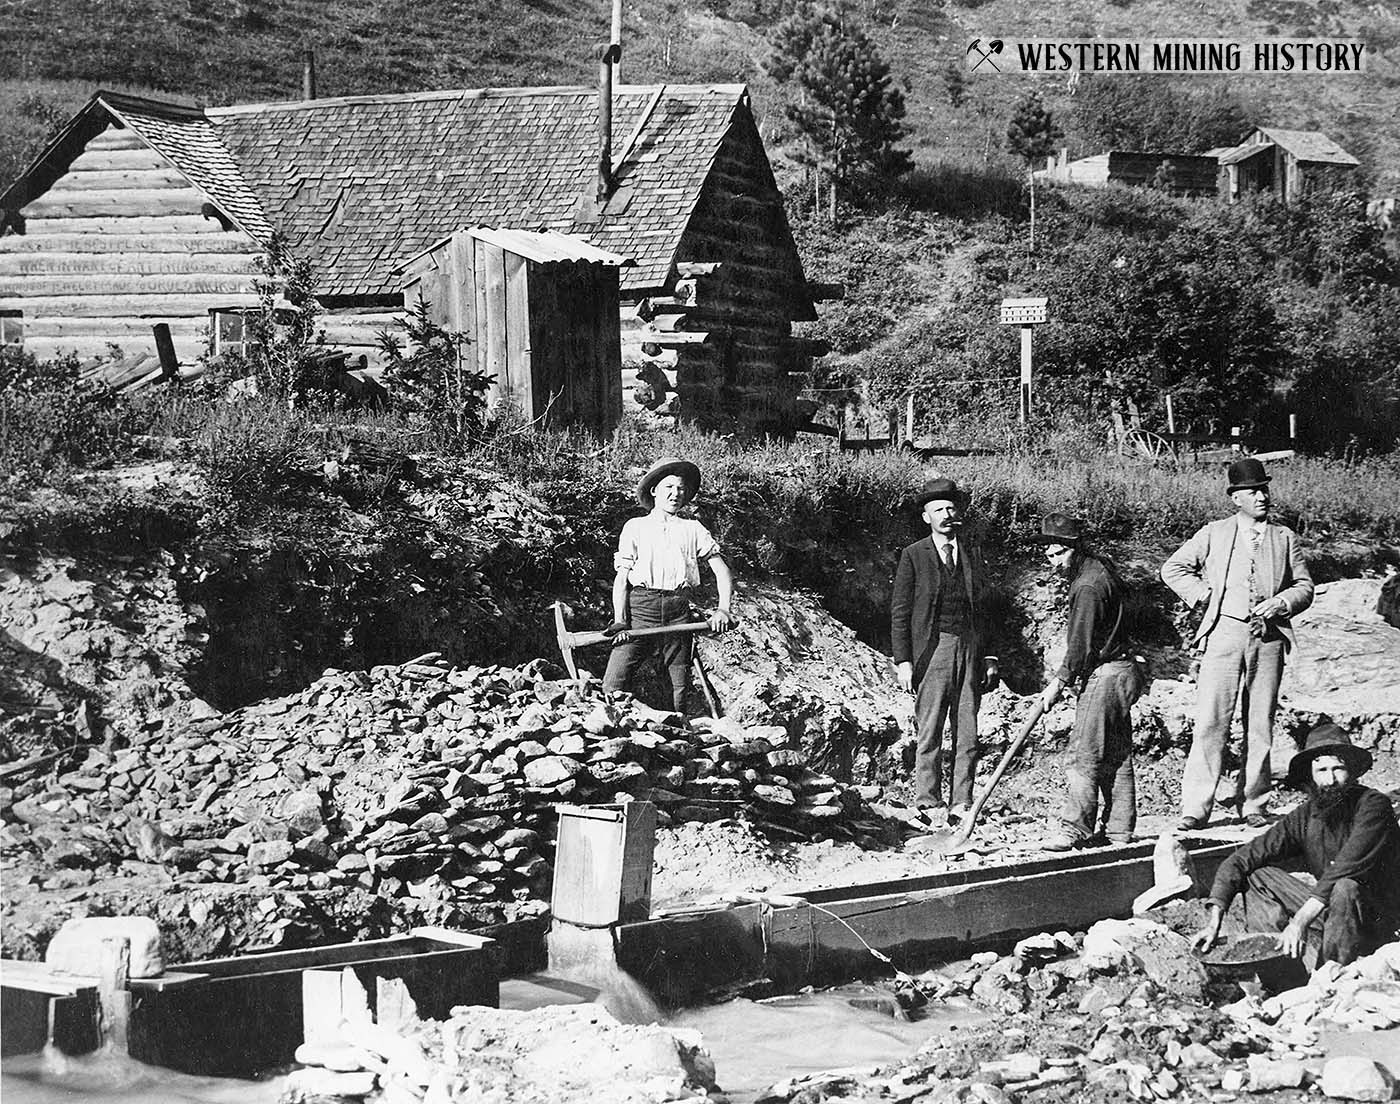 Placer miners work near Telluride, Colorado